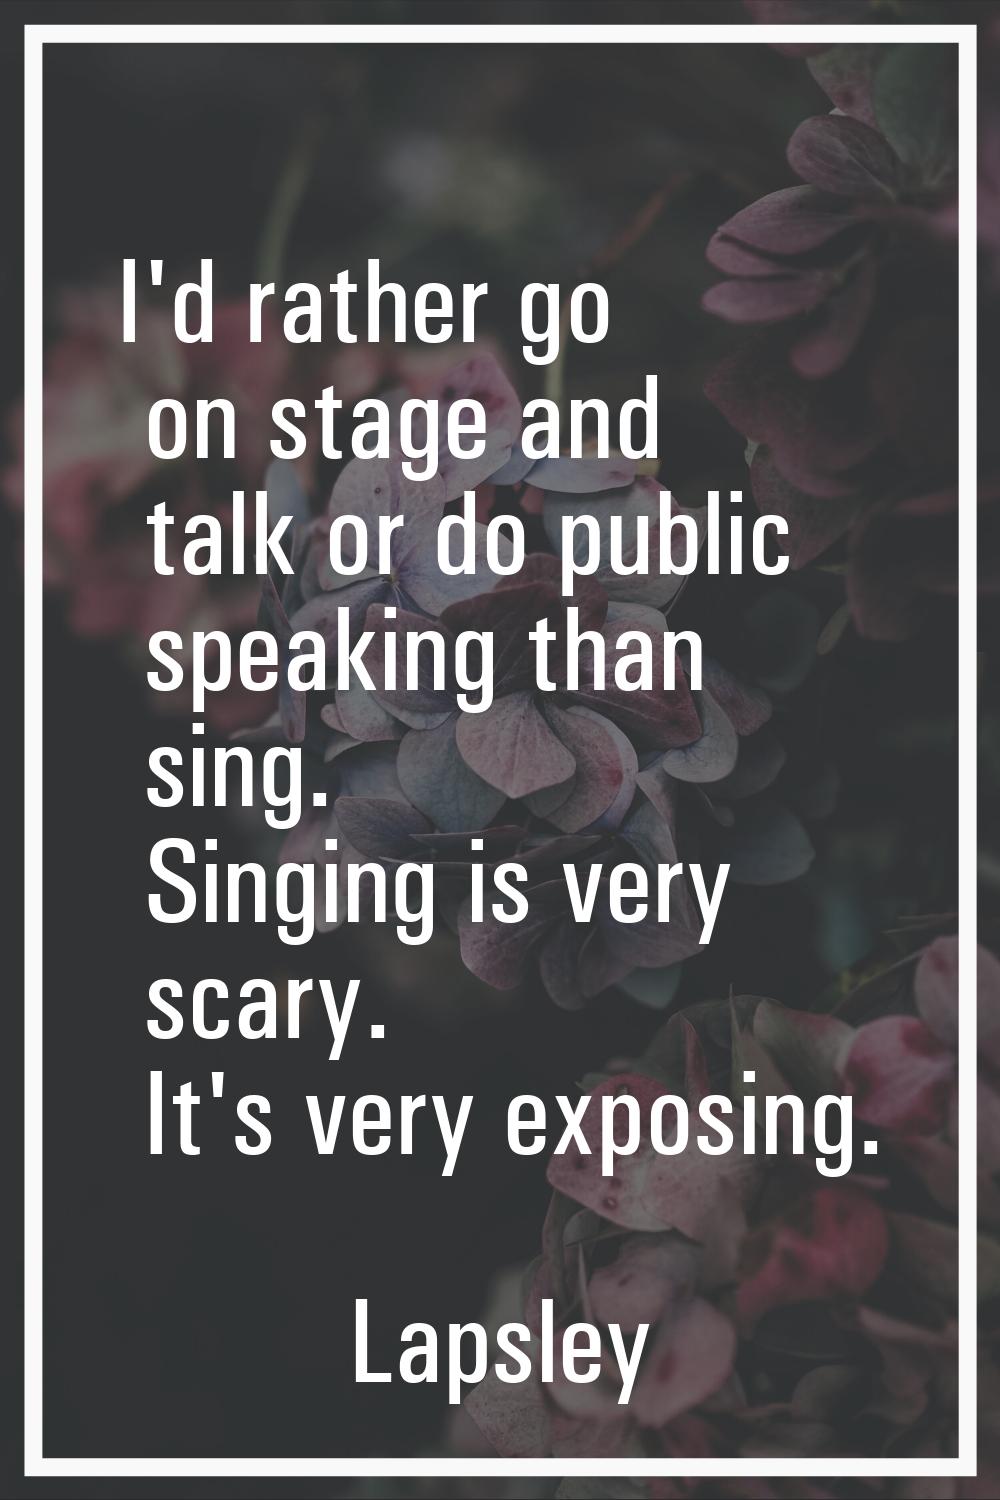 I'd rather go on stage and talk or do public speaking than sing. Singing is very scary. It's very e